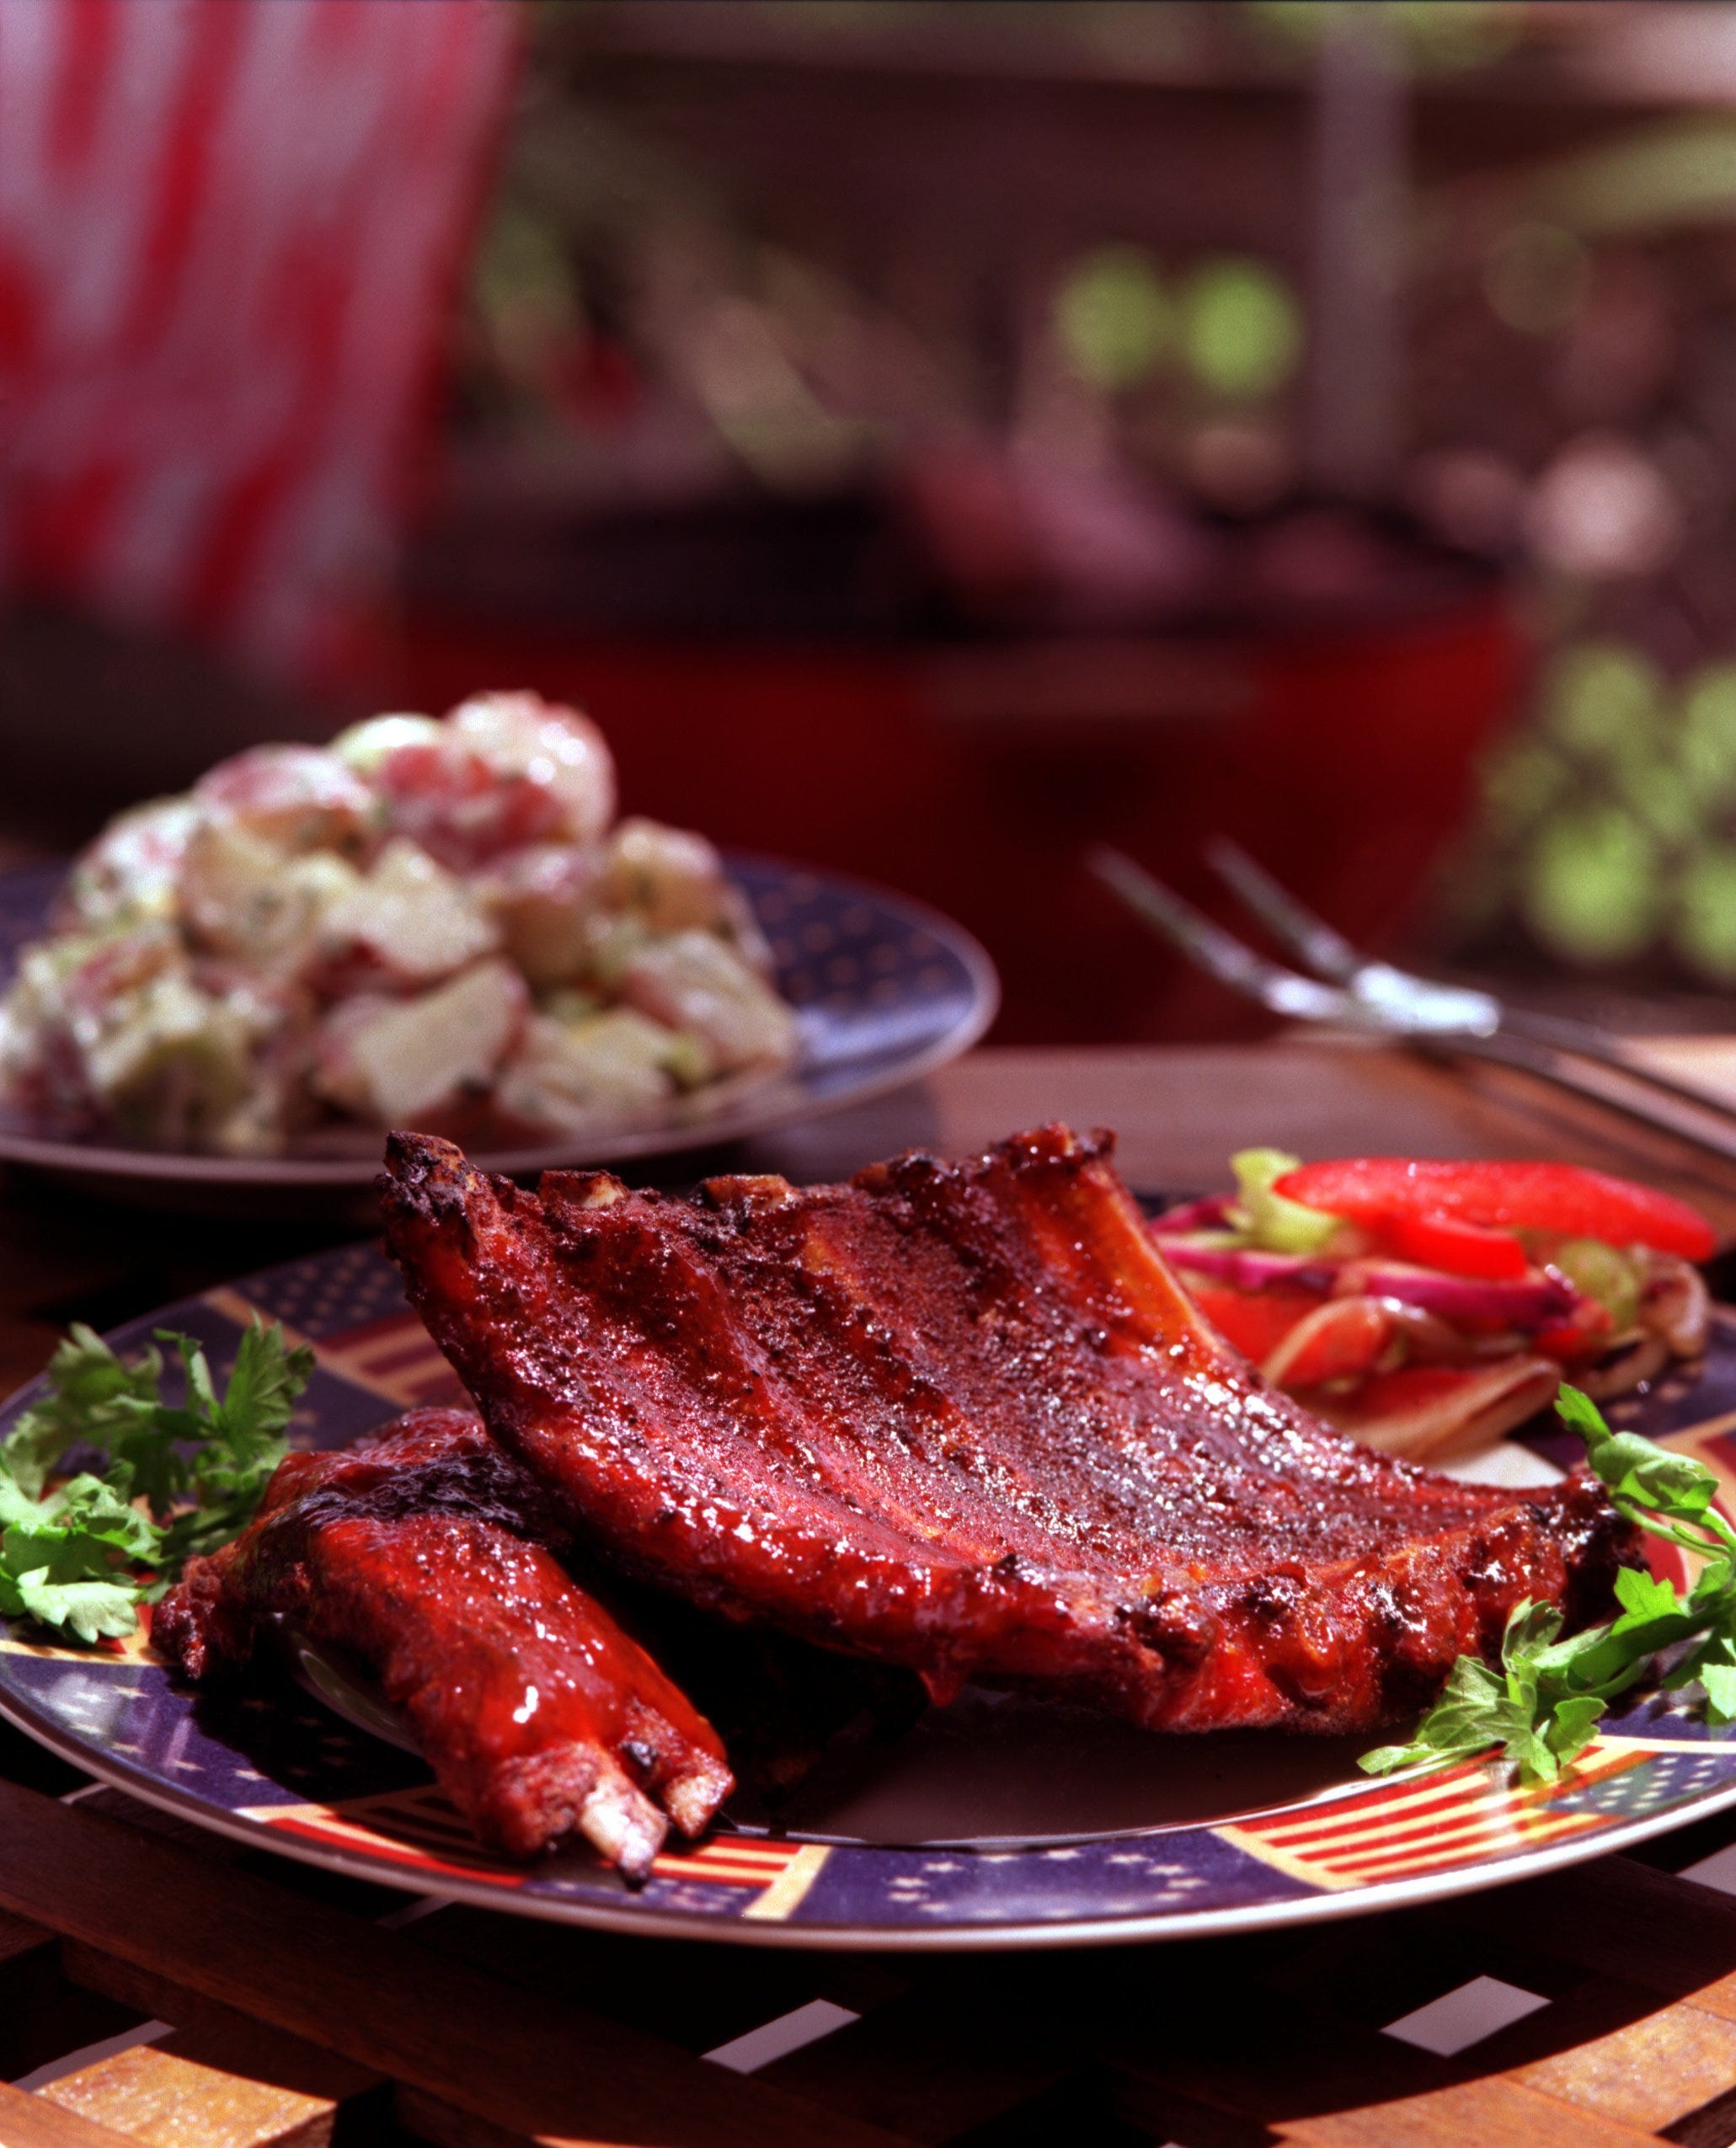 Ribs: 5 sure-fire tips for grilling perfect ribs